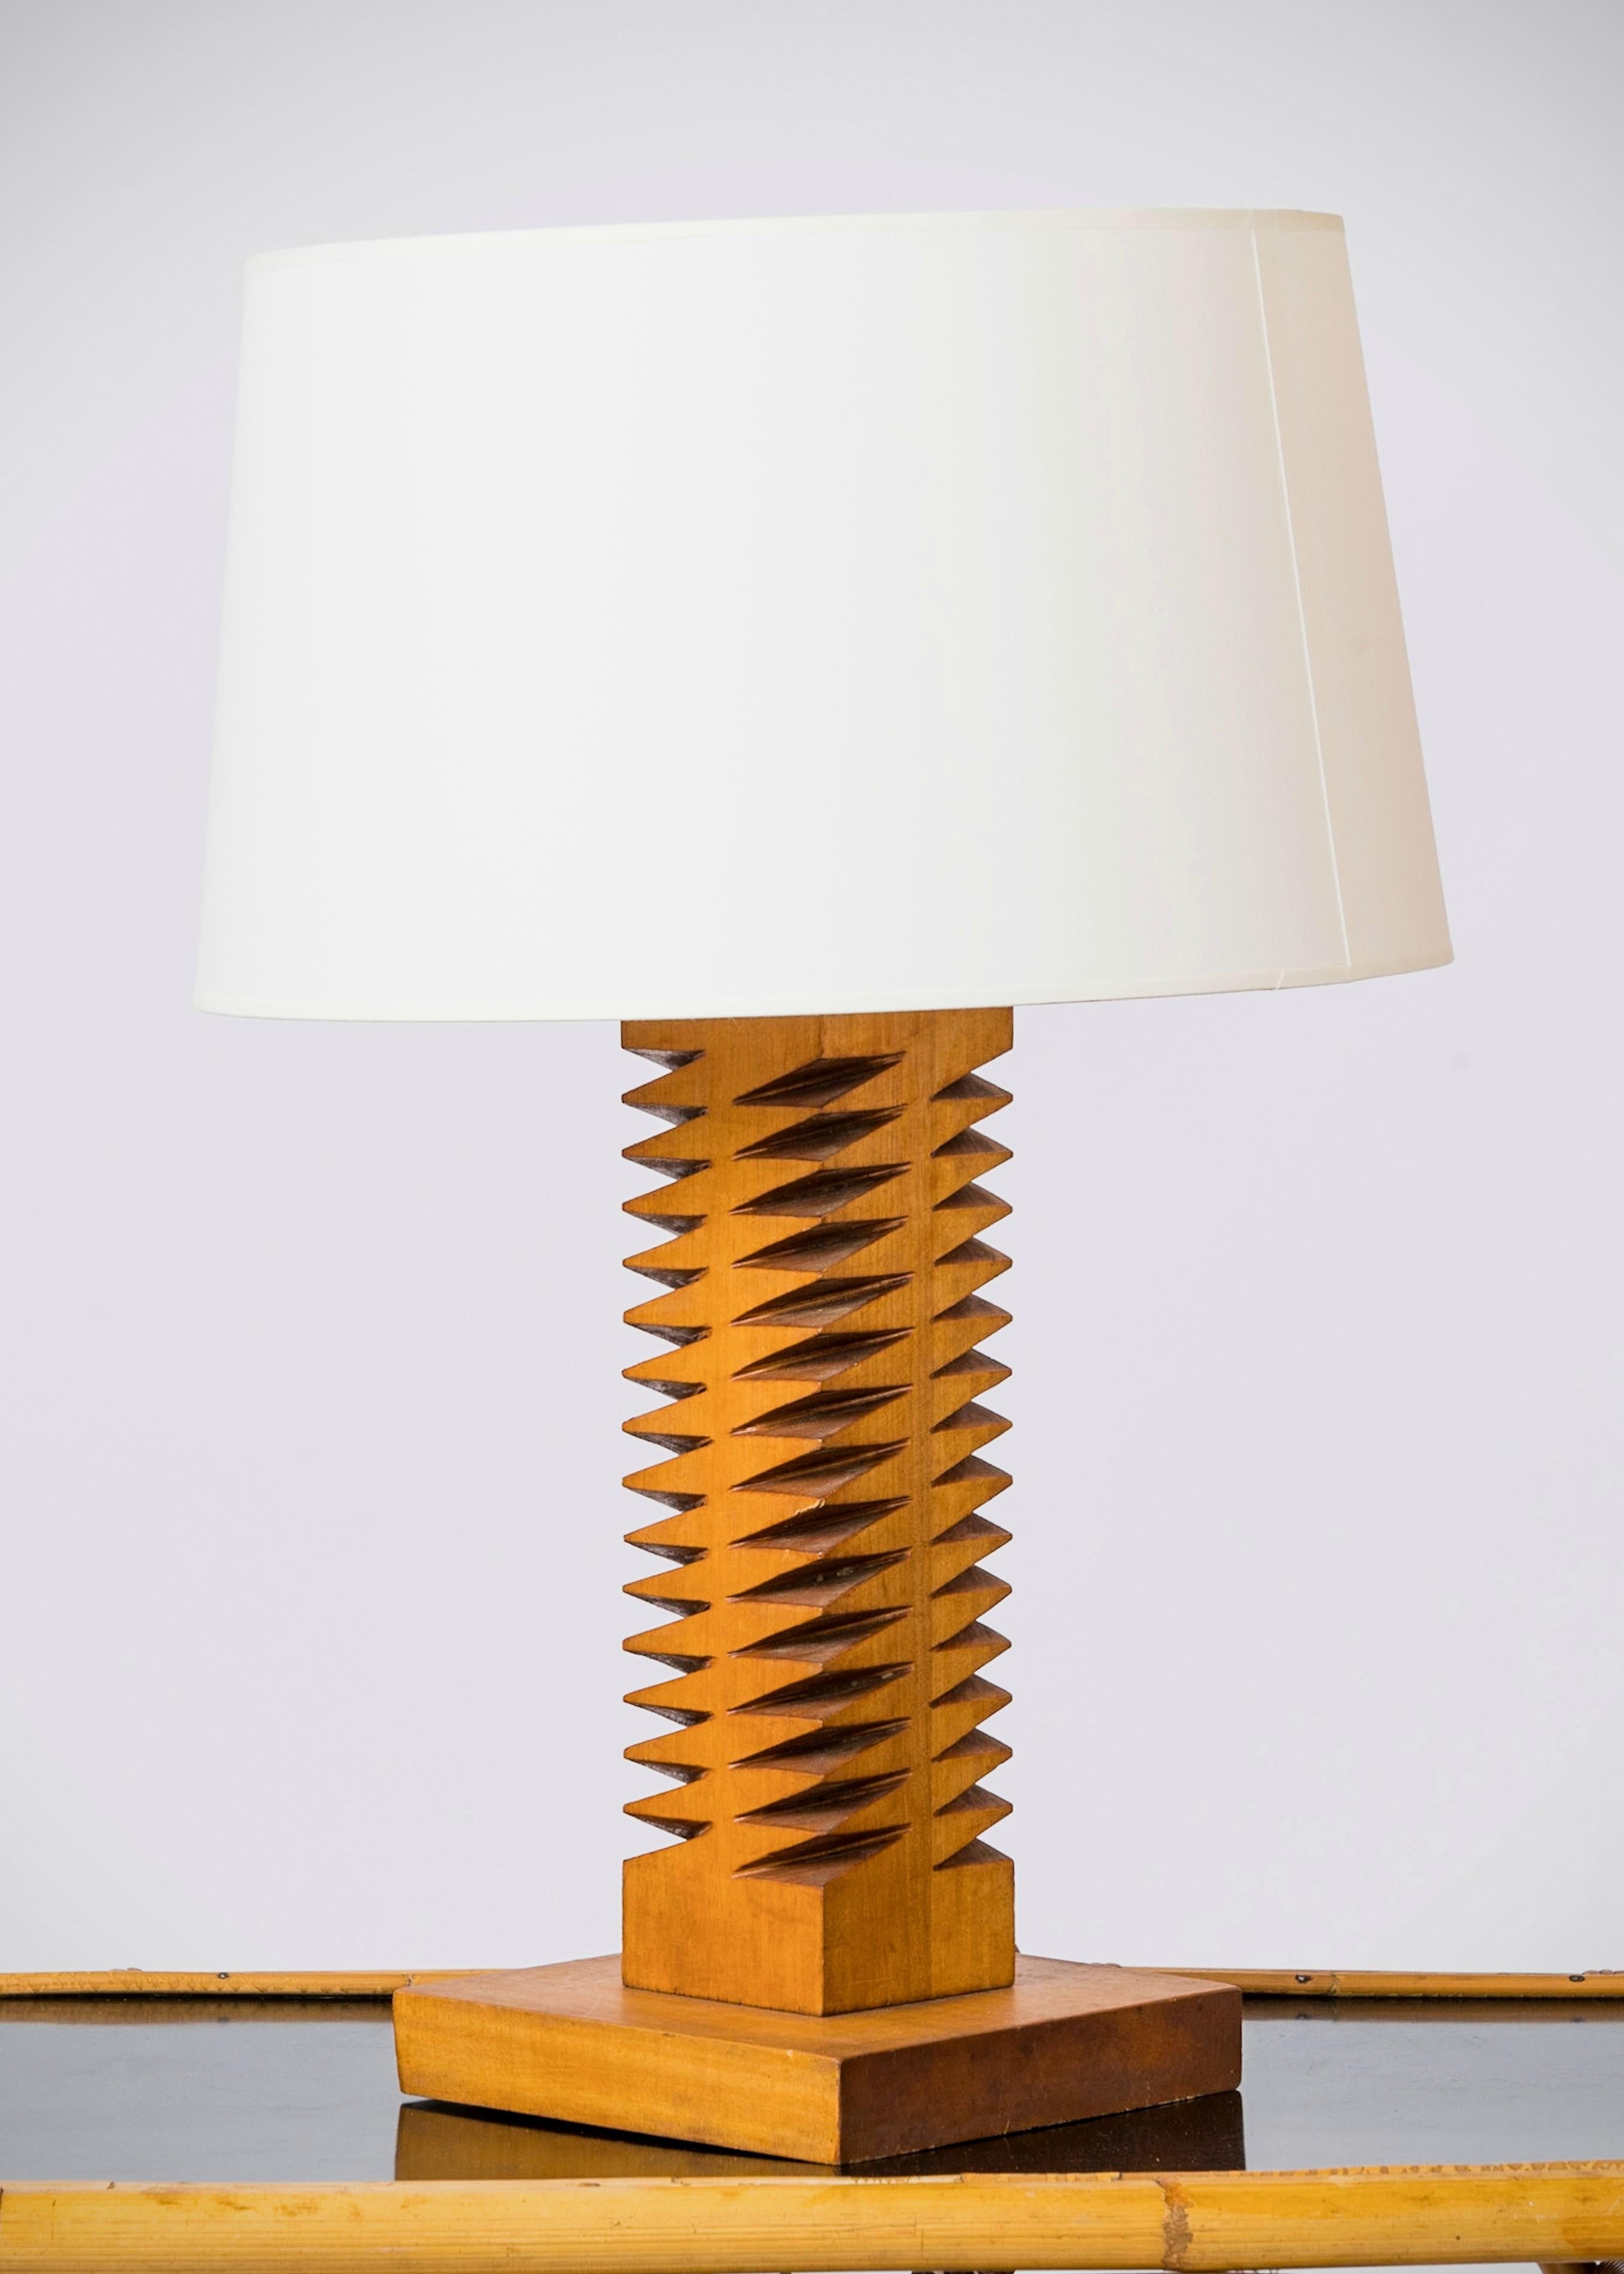 Graphic etched oak table lamp. France 1950s. 
European socket and wiring.
This lamp will ship from France and can be returned to either France or to an upstate NY location. 
Price does not include packing, shipping not possible customs duties